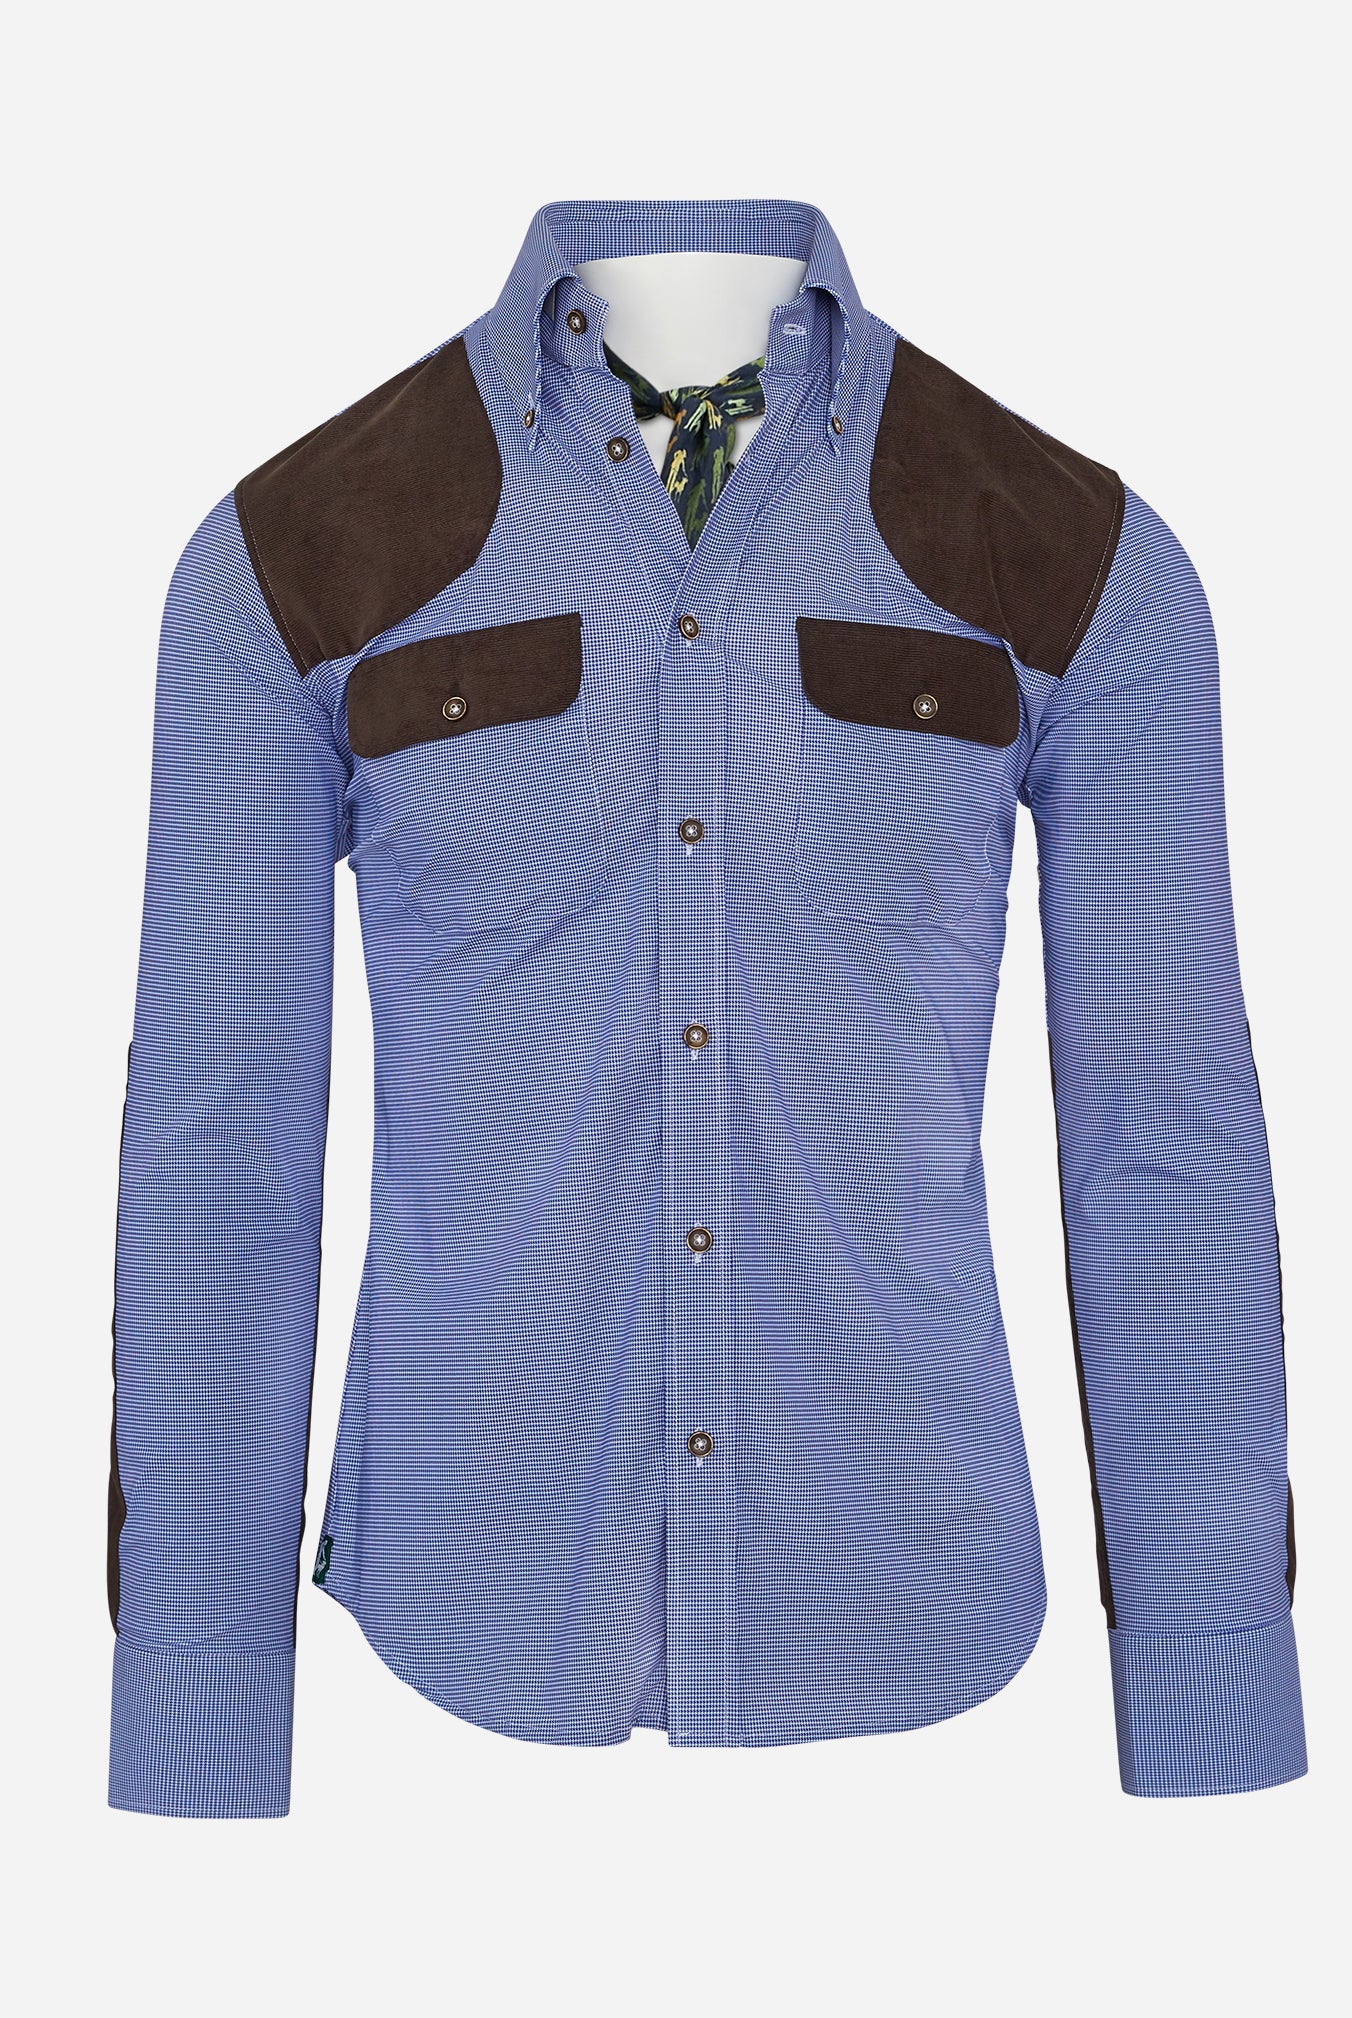 CDC Performance Field Shirt in Blue with Dark Brown